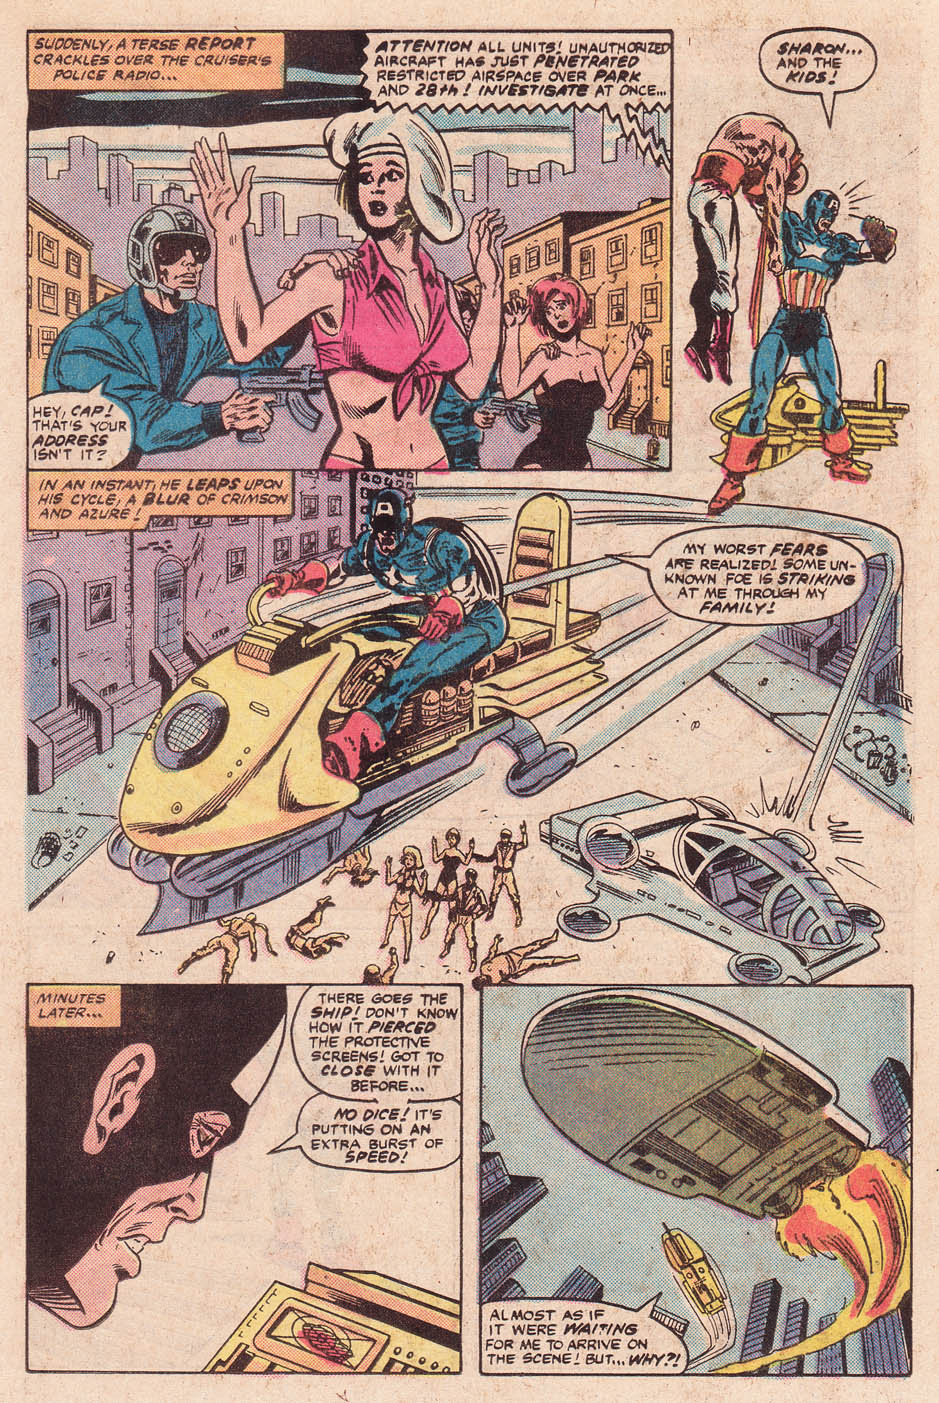 What If? (1977) issue 38 - Daredevil and Captain America - Page 21